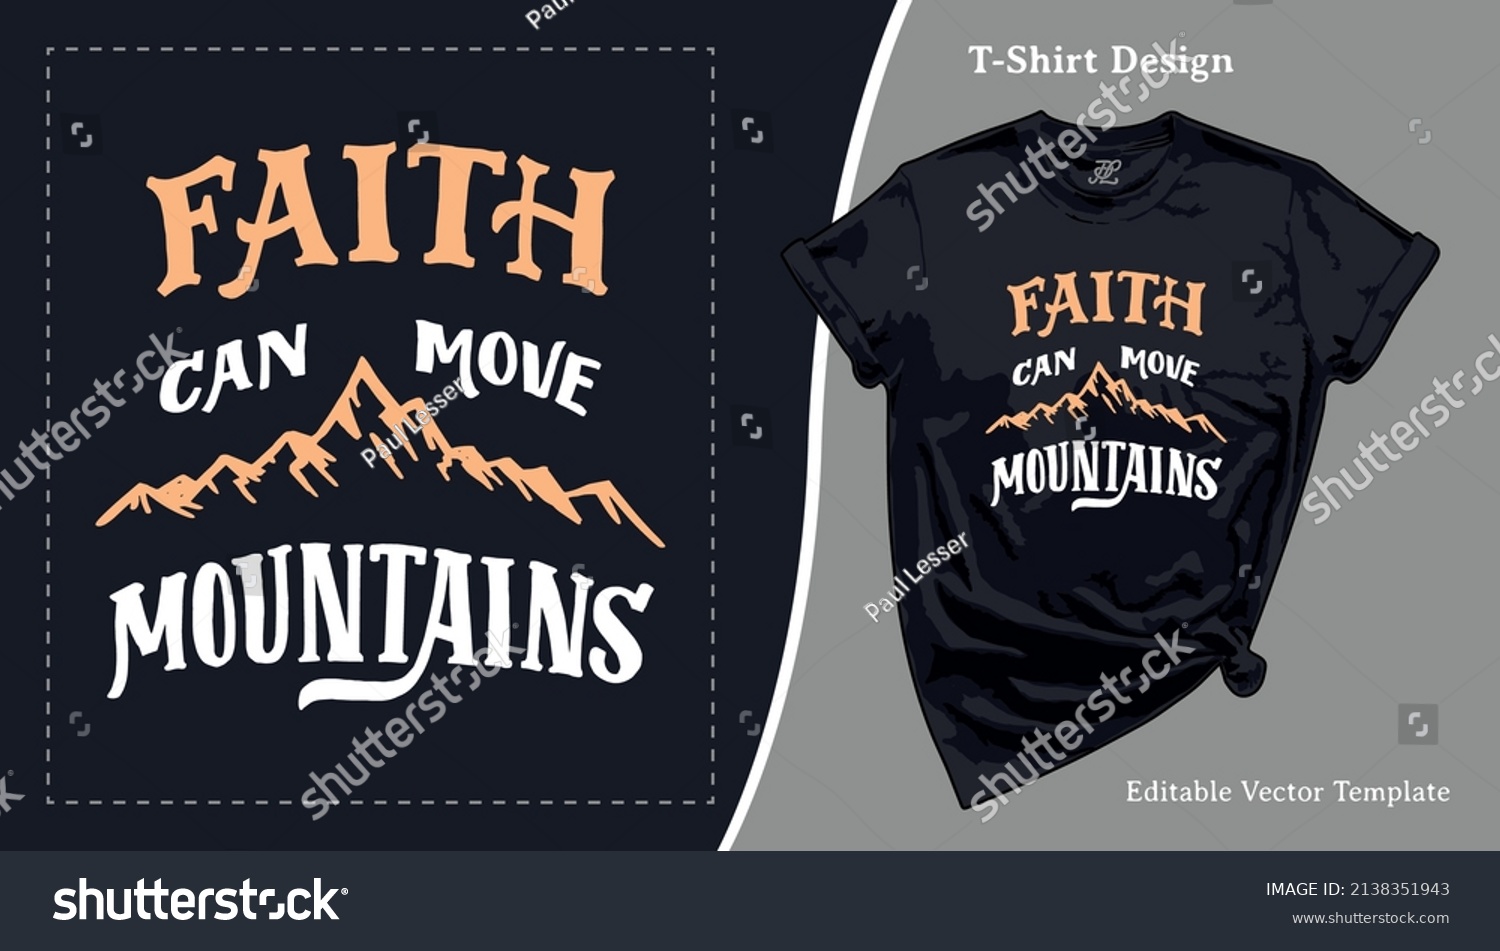 SVG of Faith can move mountains. Bible hand-drawn quote T-Shirt Design. T shirt template with a Christian lettering for Camping Tee Print, Hiking Apparel and Clothing svg